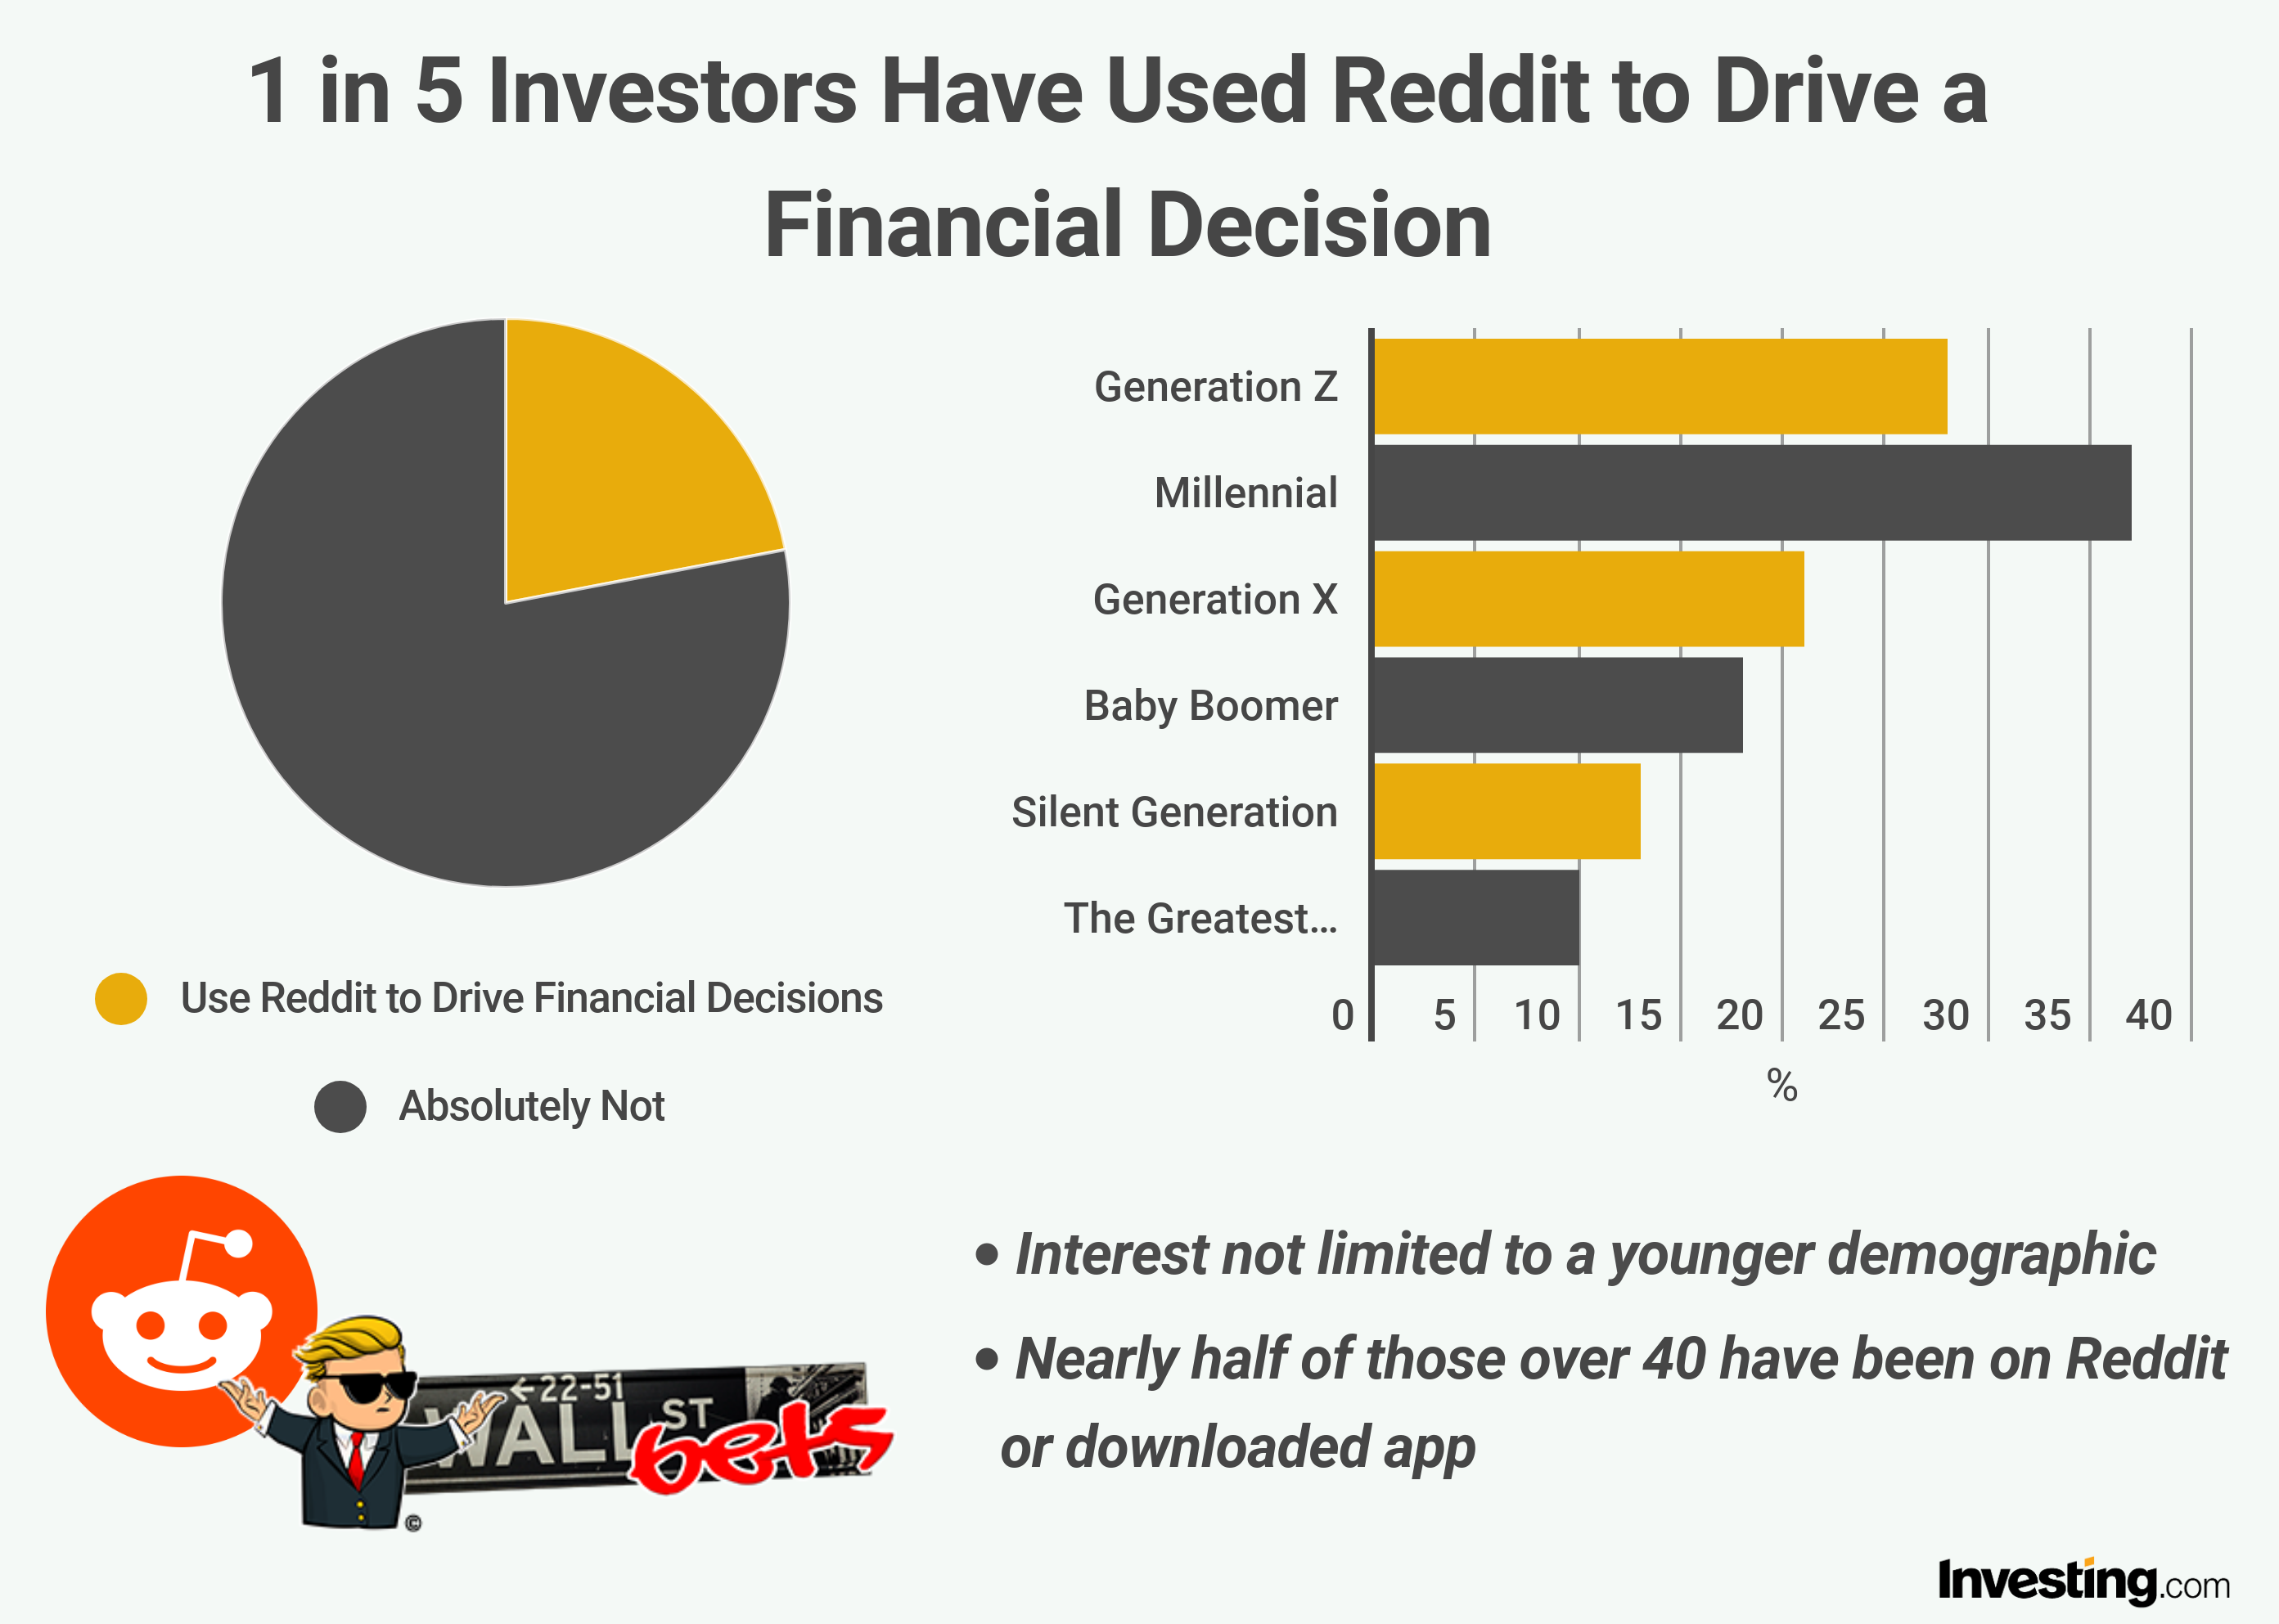 Reddit is going public and inviting power users to invest - The Verge